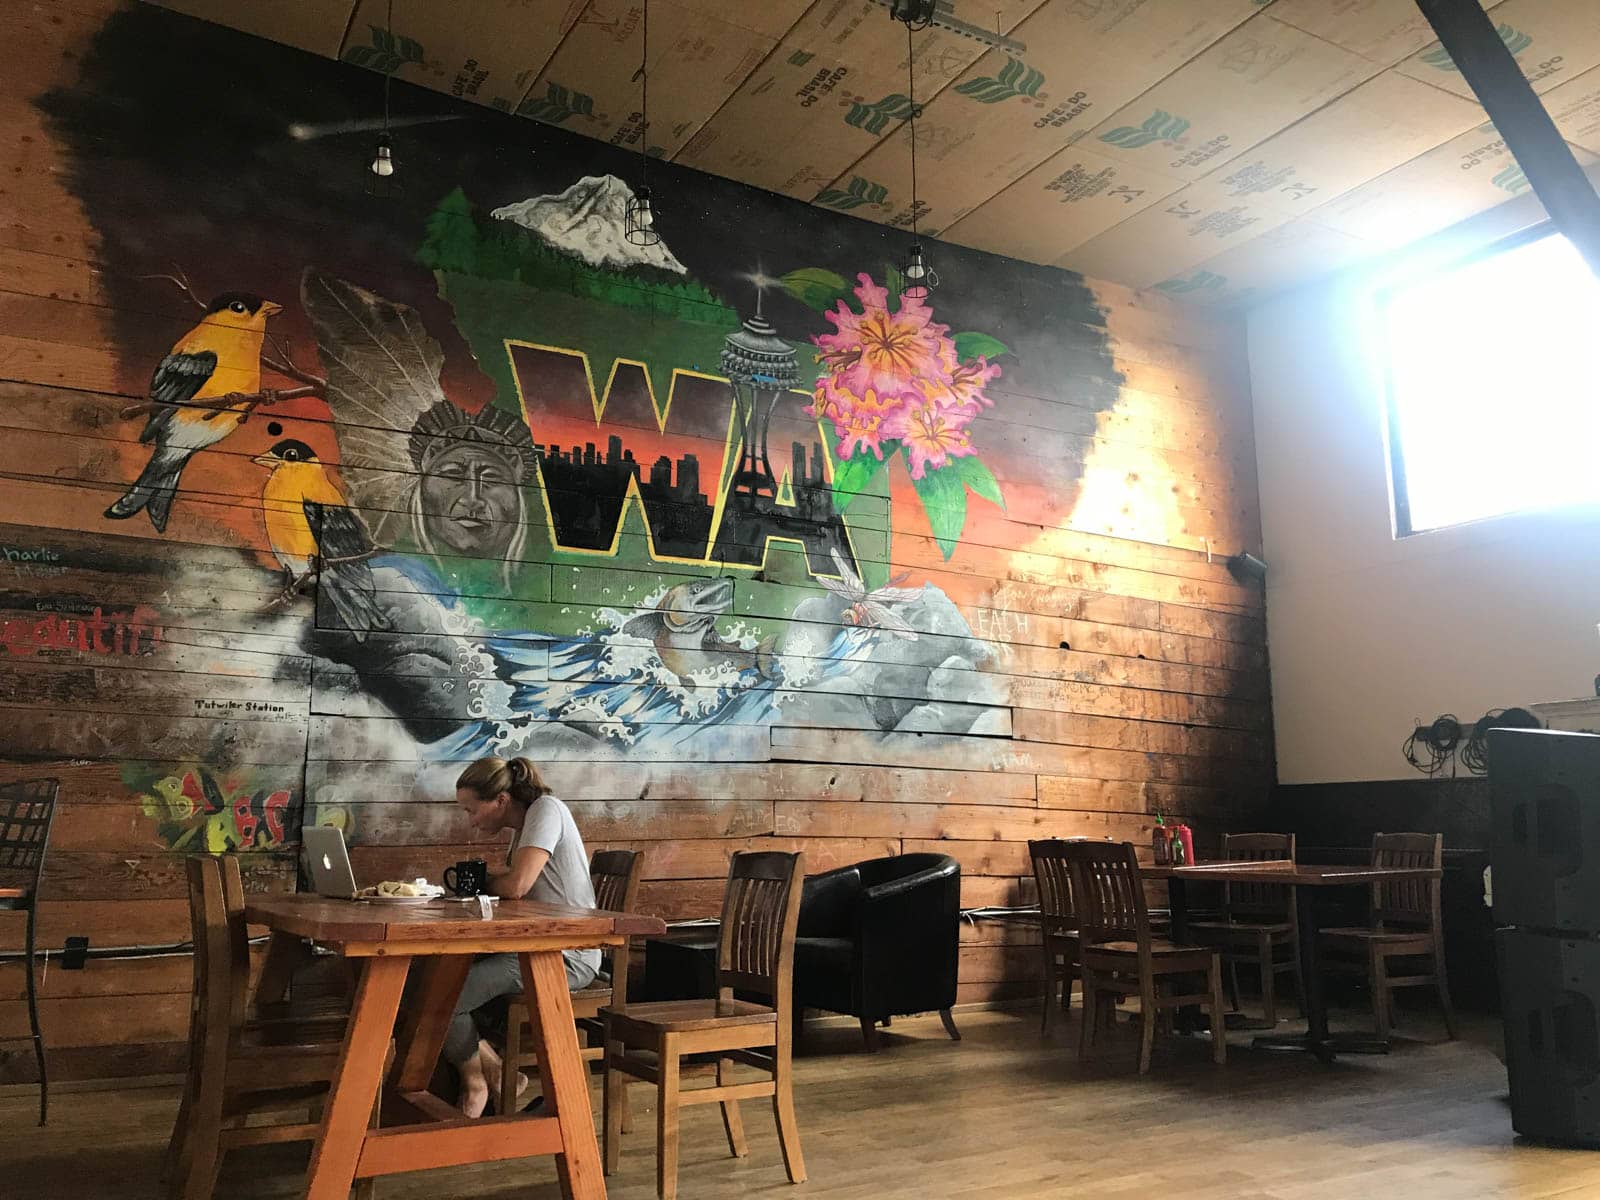 A cafe setting with wooden tables and chairs, and a wooden wall with a giant colourful mural reading “WA” with some icons of the state of Washington in USA. A woman sits with a laptop at one of the tables, deep in focus.